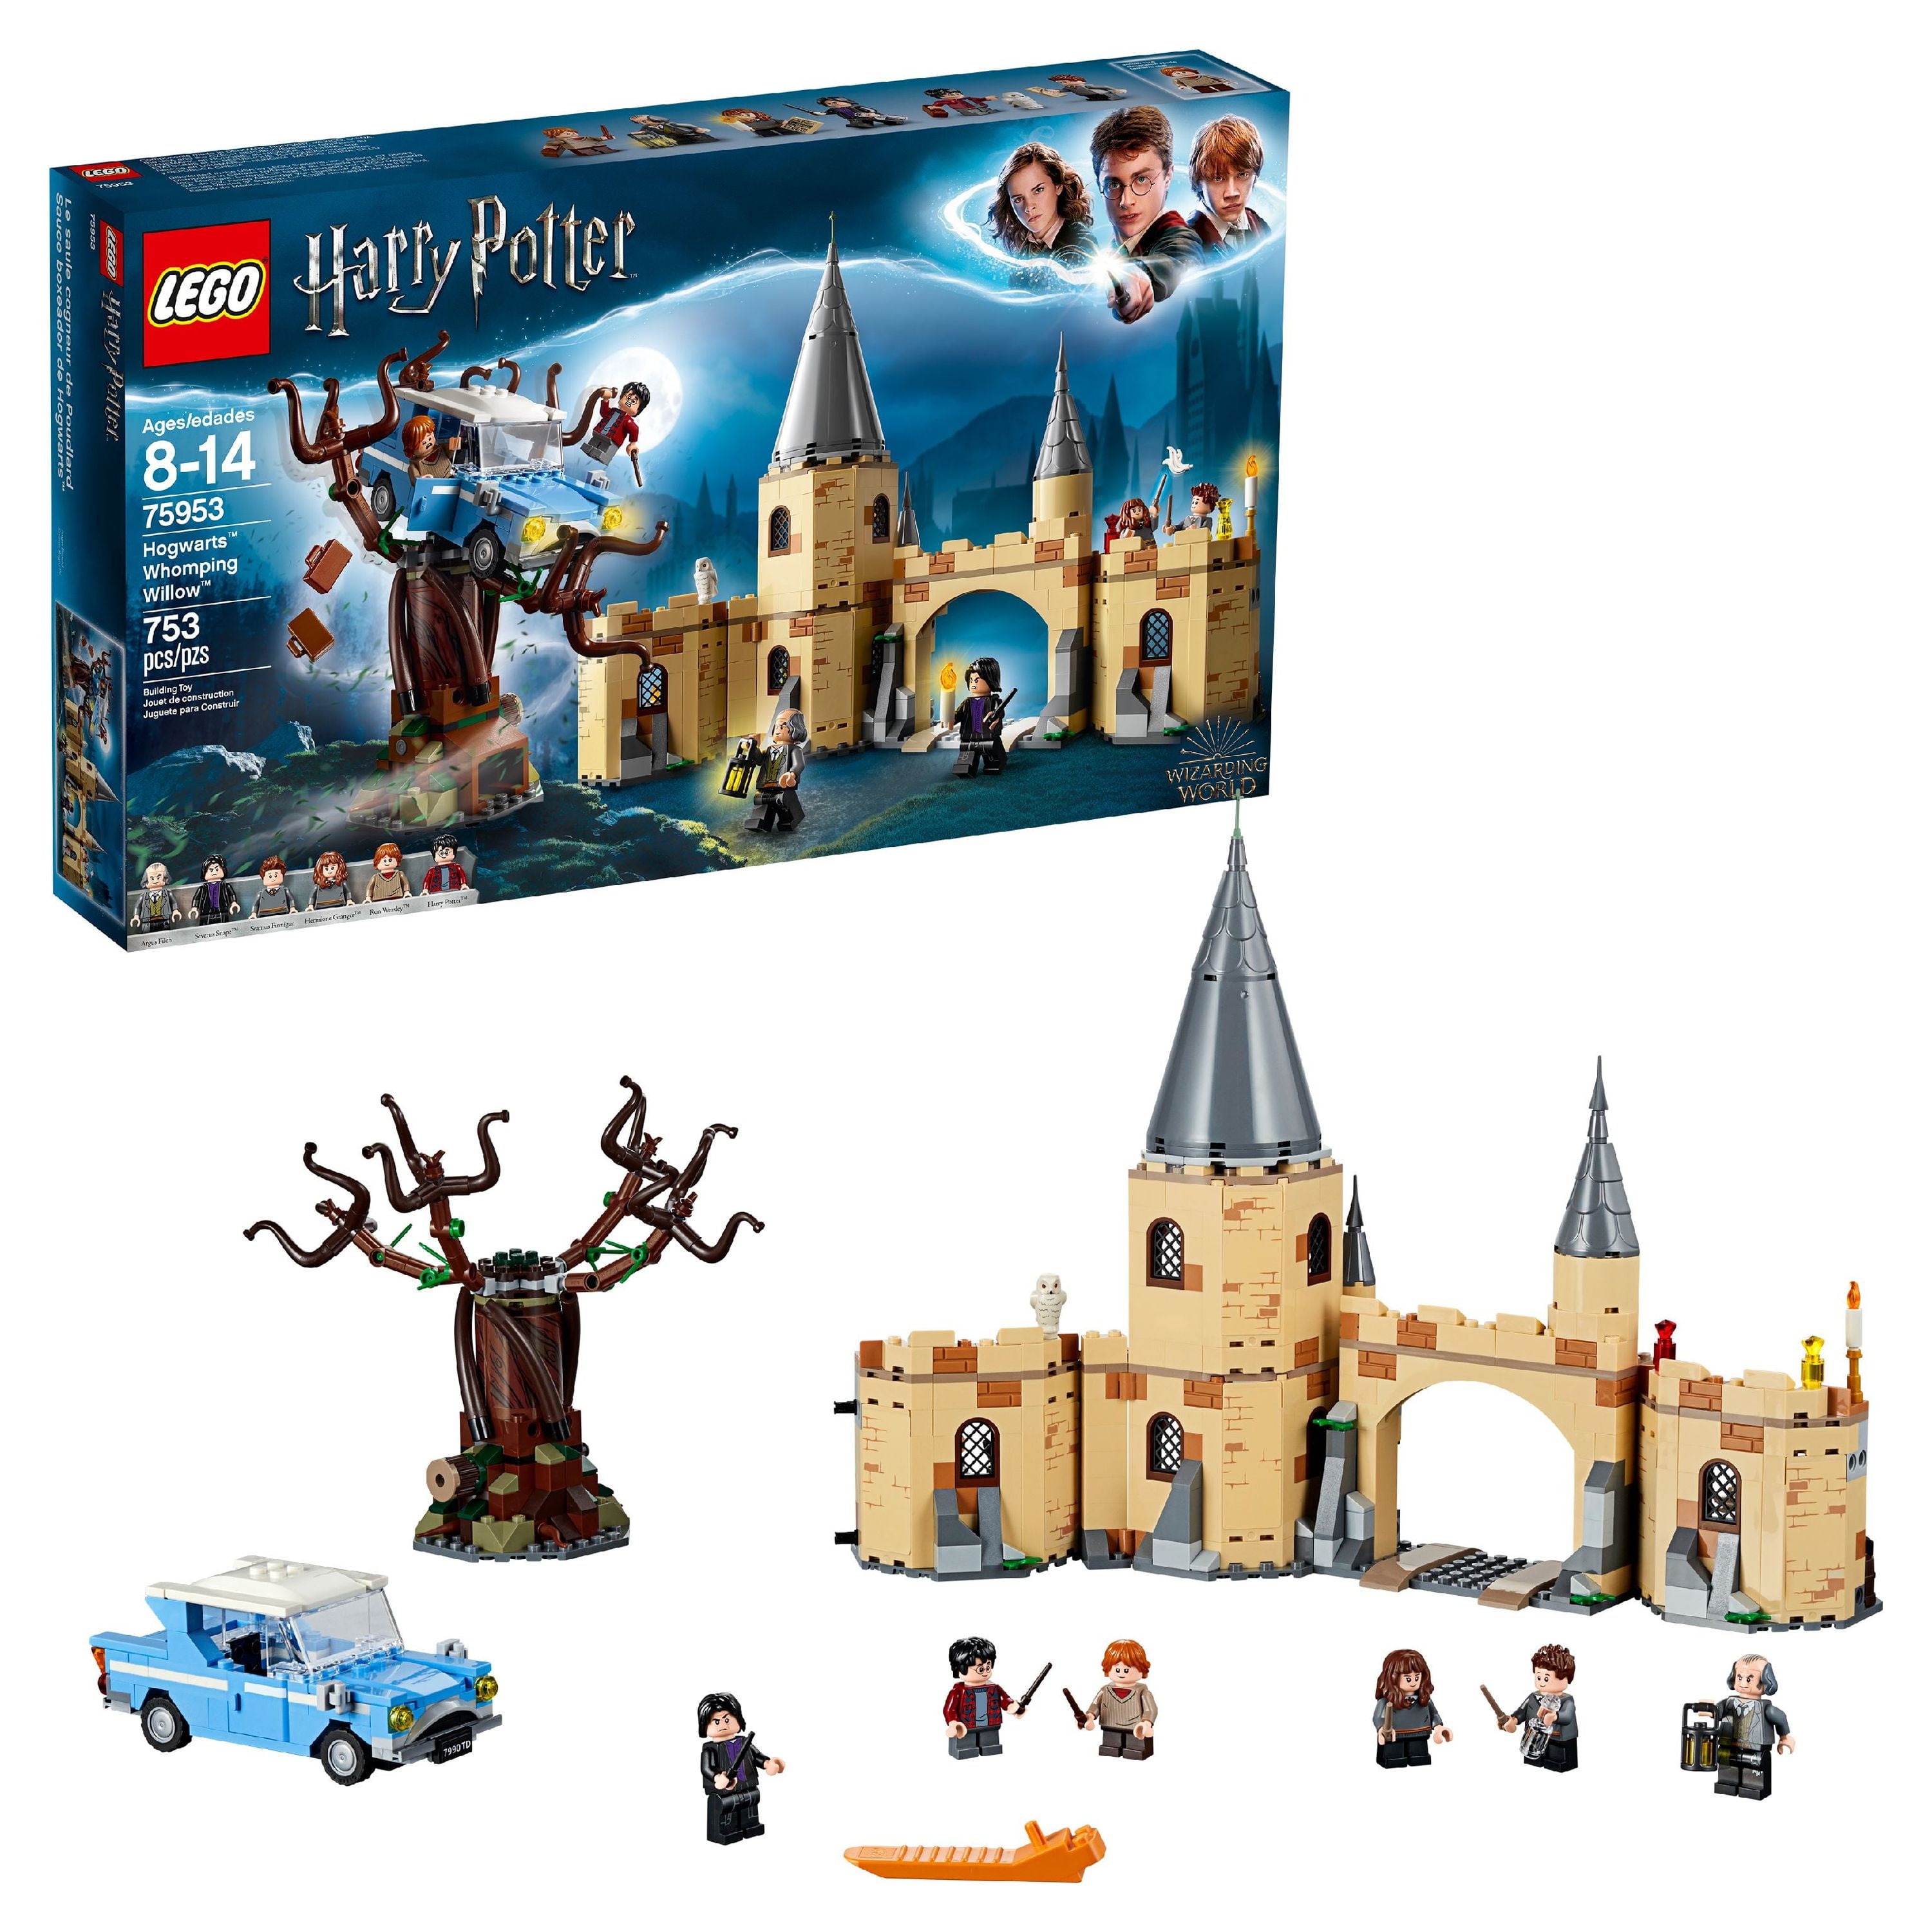 LEGO Harry Potter Hogwarts Whomping Willow 75953 (753 Pieces